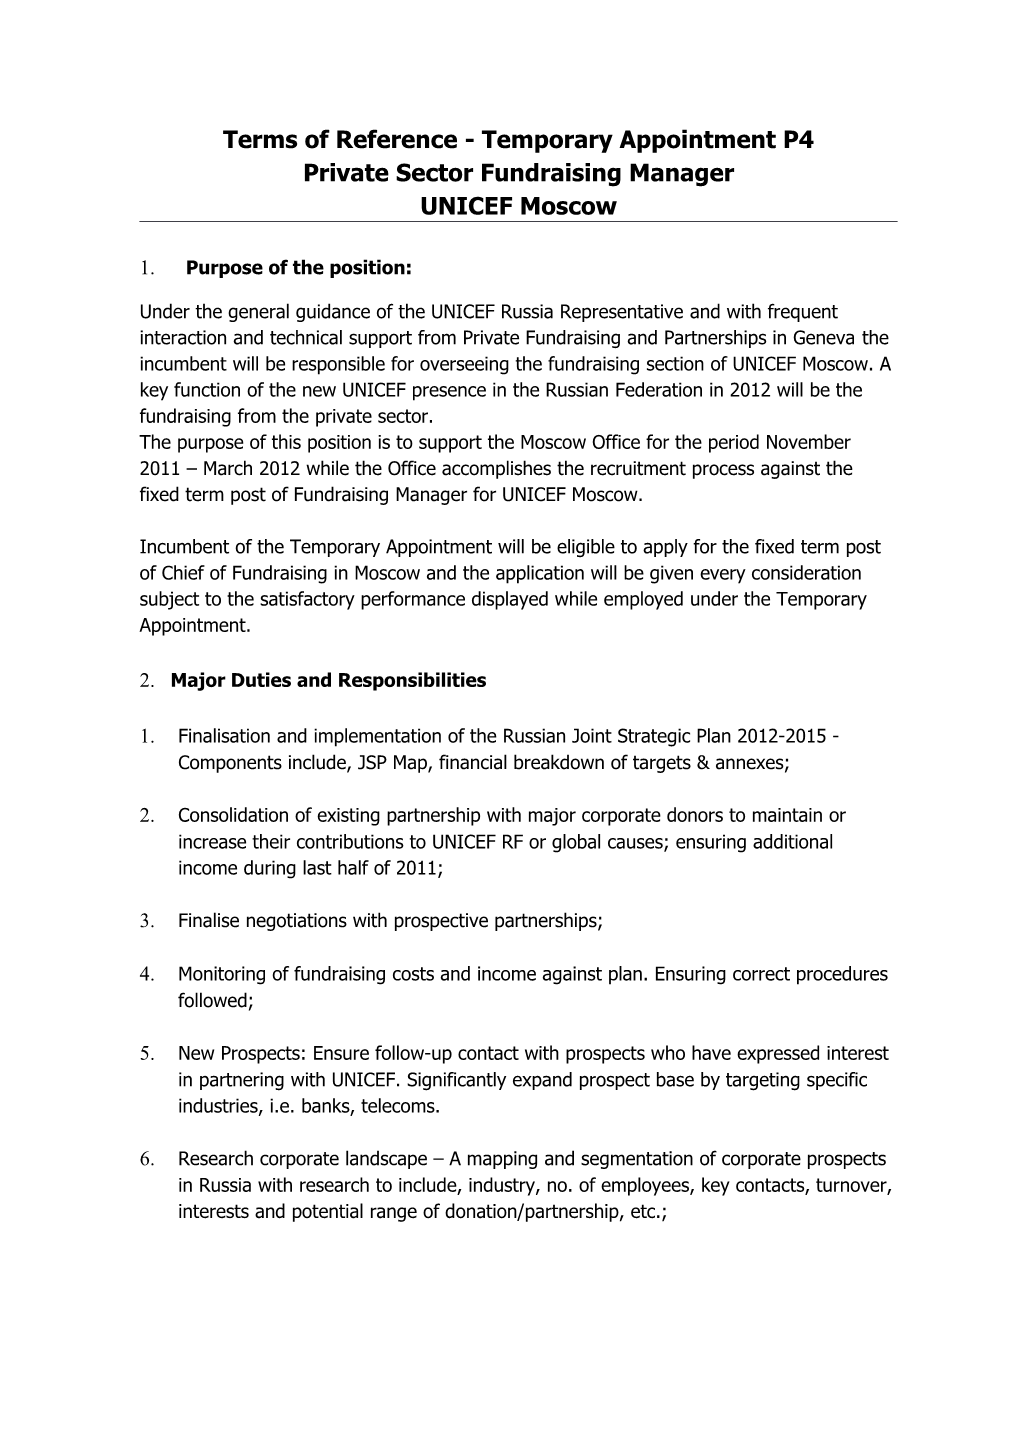 Terms of Reference- Temporary Appointment P4